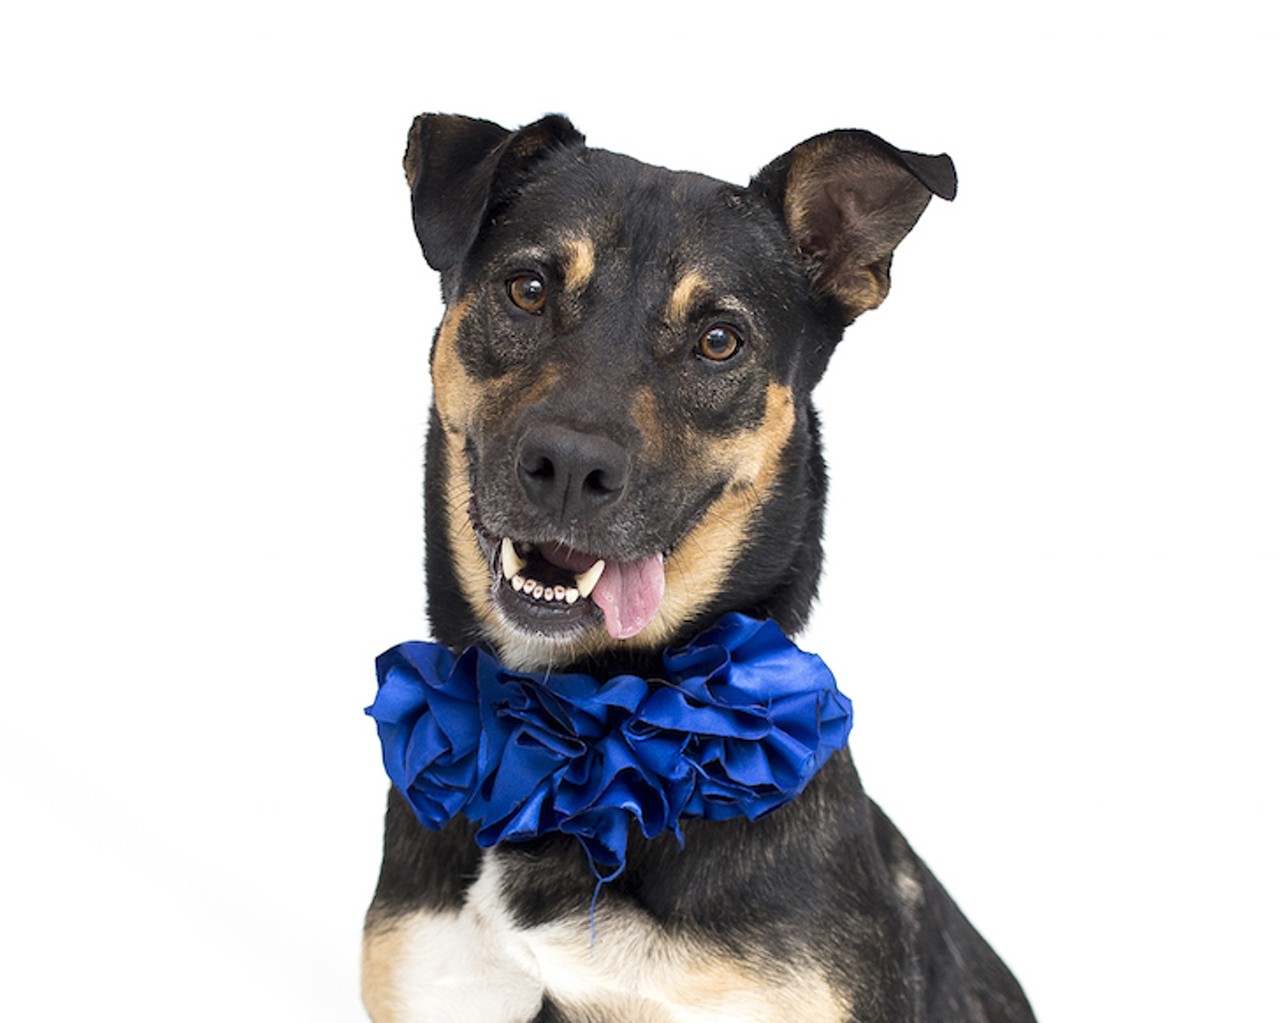 19 Orlando dogs just beggin' to be adopted